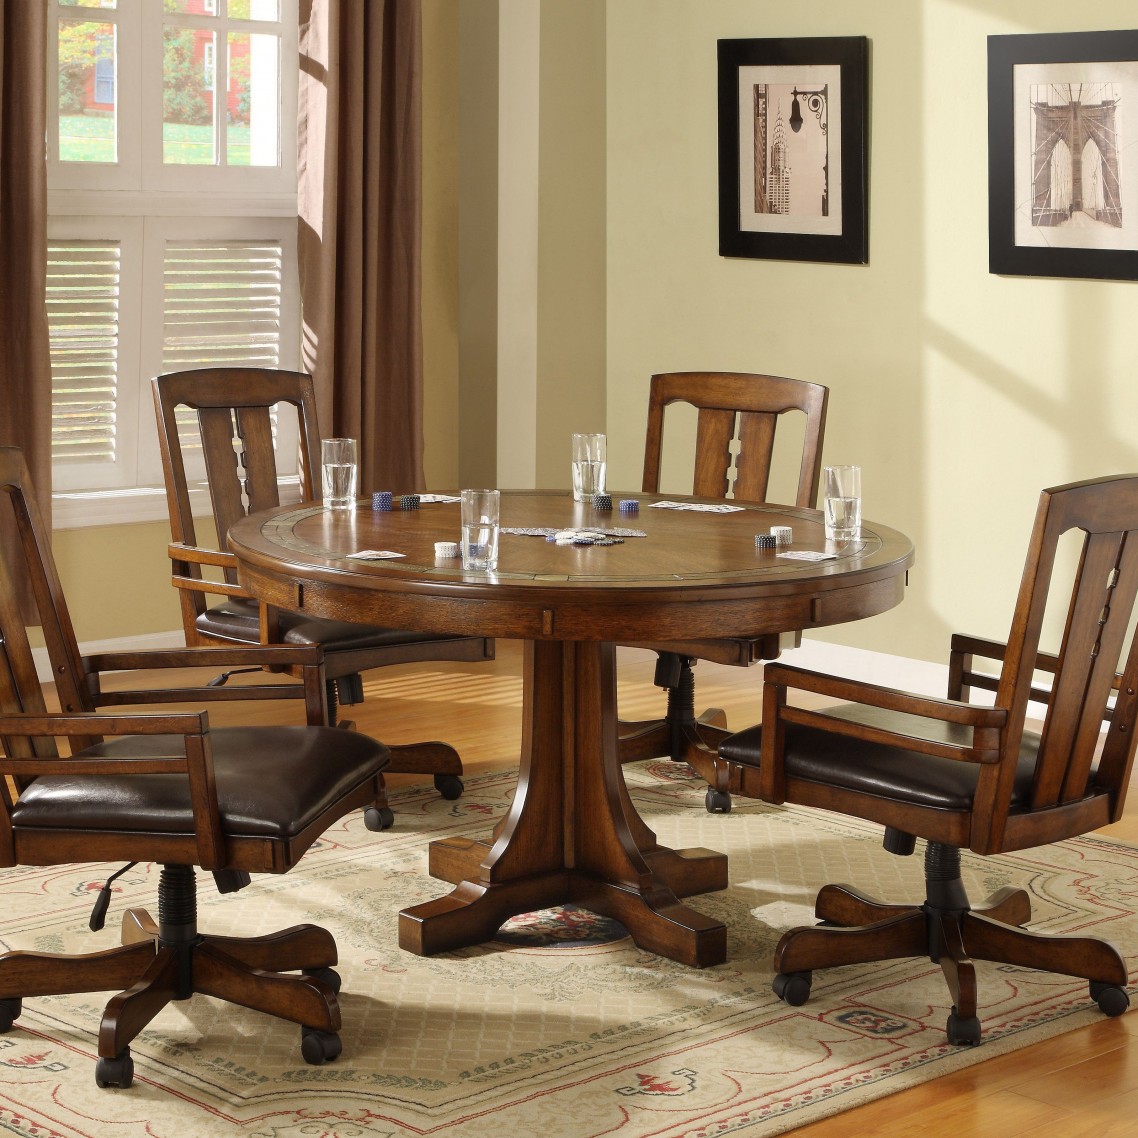 dining room sets with wheels on chairs